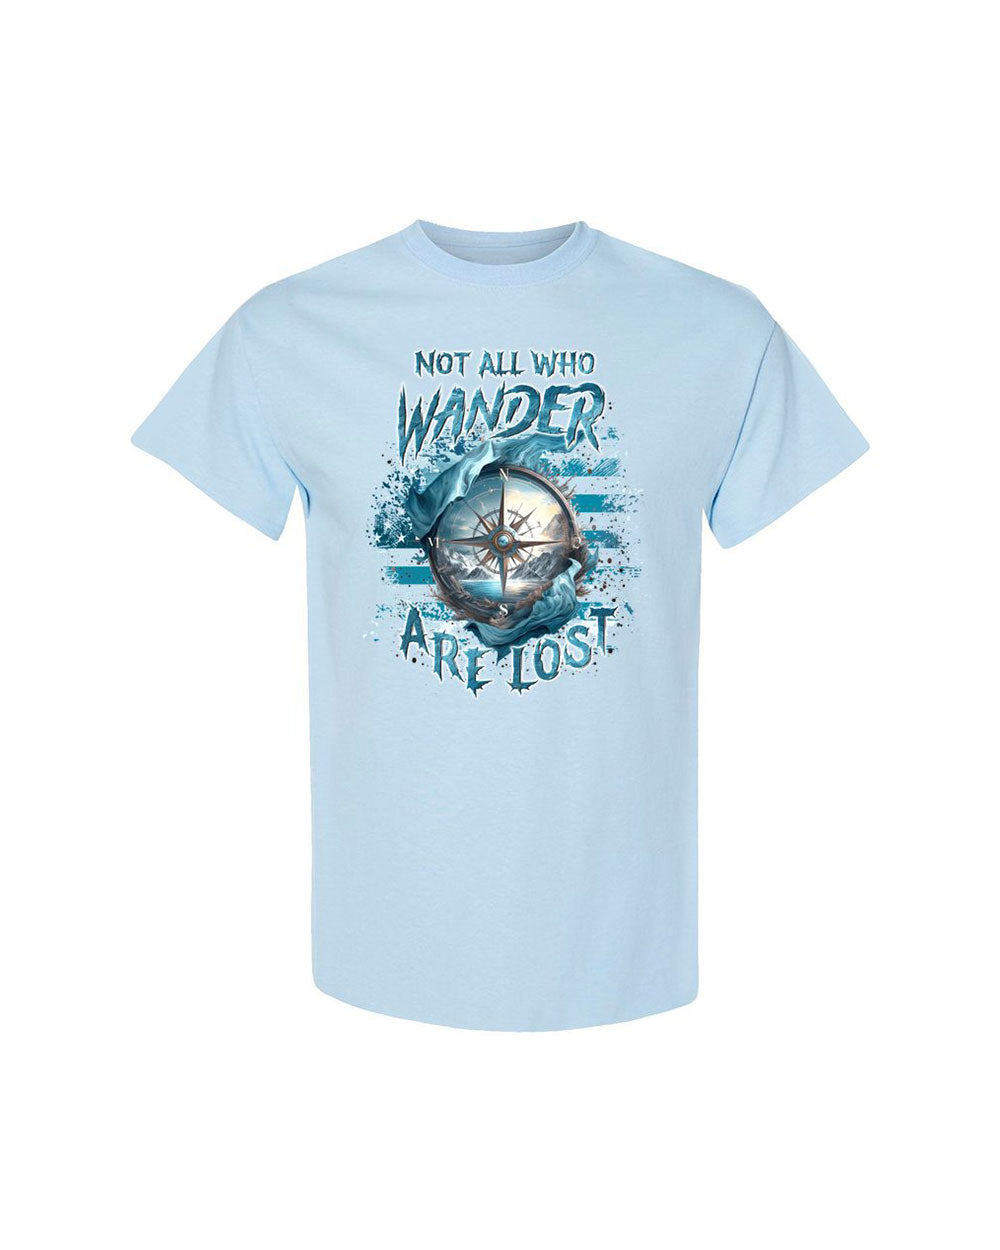 NOT ALL WHO WANDER ARE LOST COTTON SHIRT - YHLN1603246